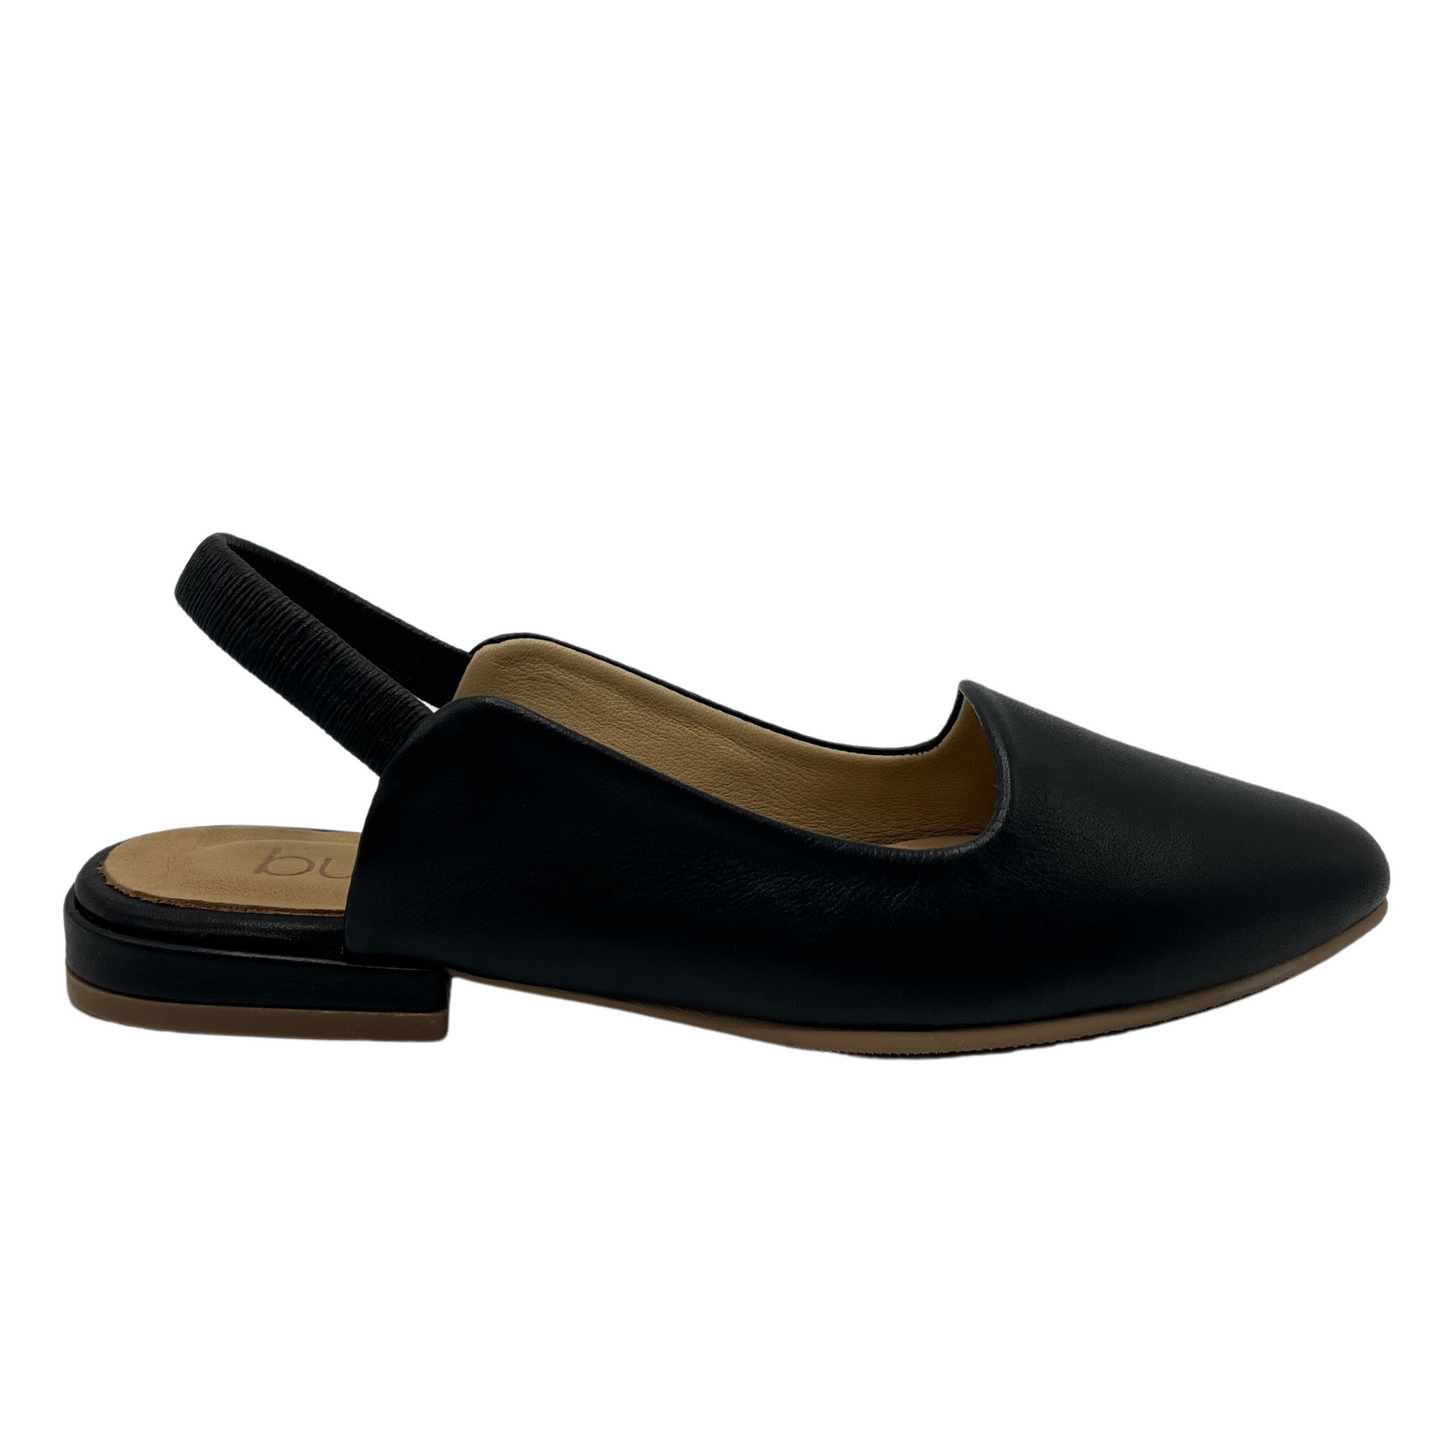 Right facing view of black leather flat with pointed toe and slingback strap